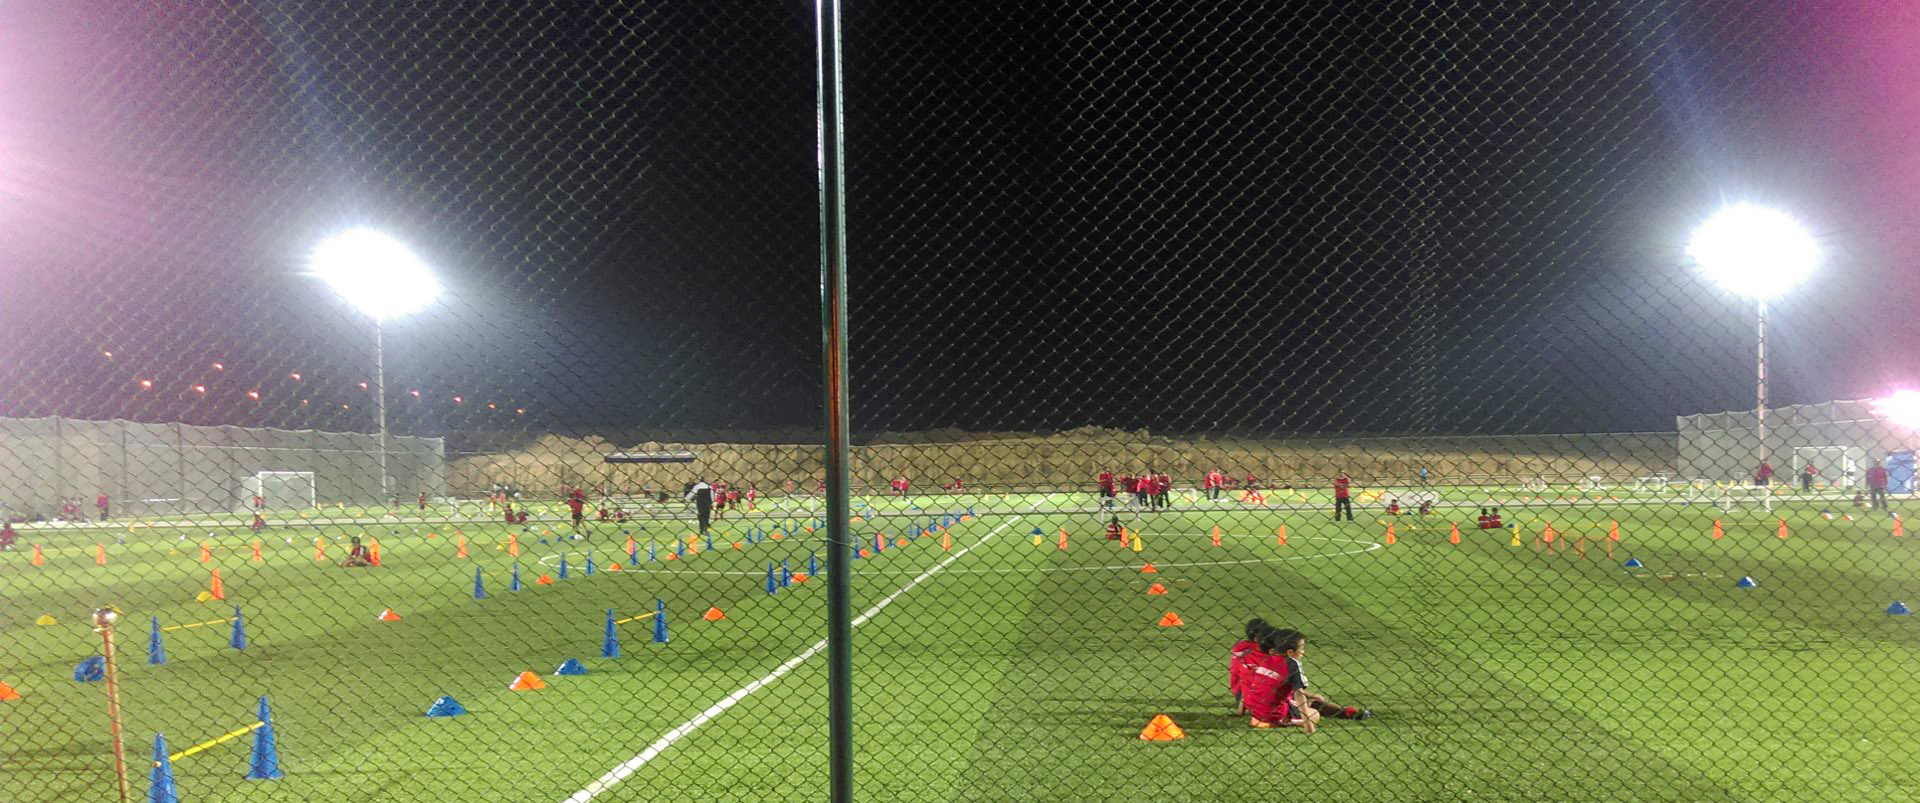 New Xtreme Turf surface at Al-Ahly Sporting Club